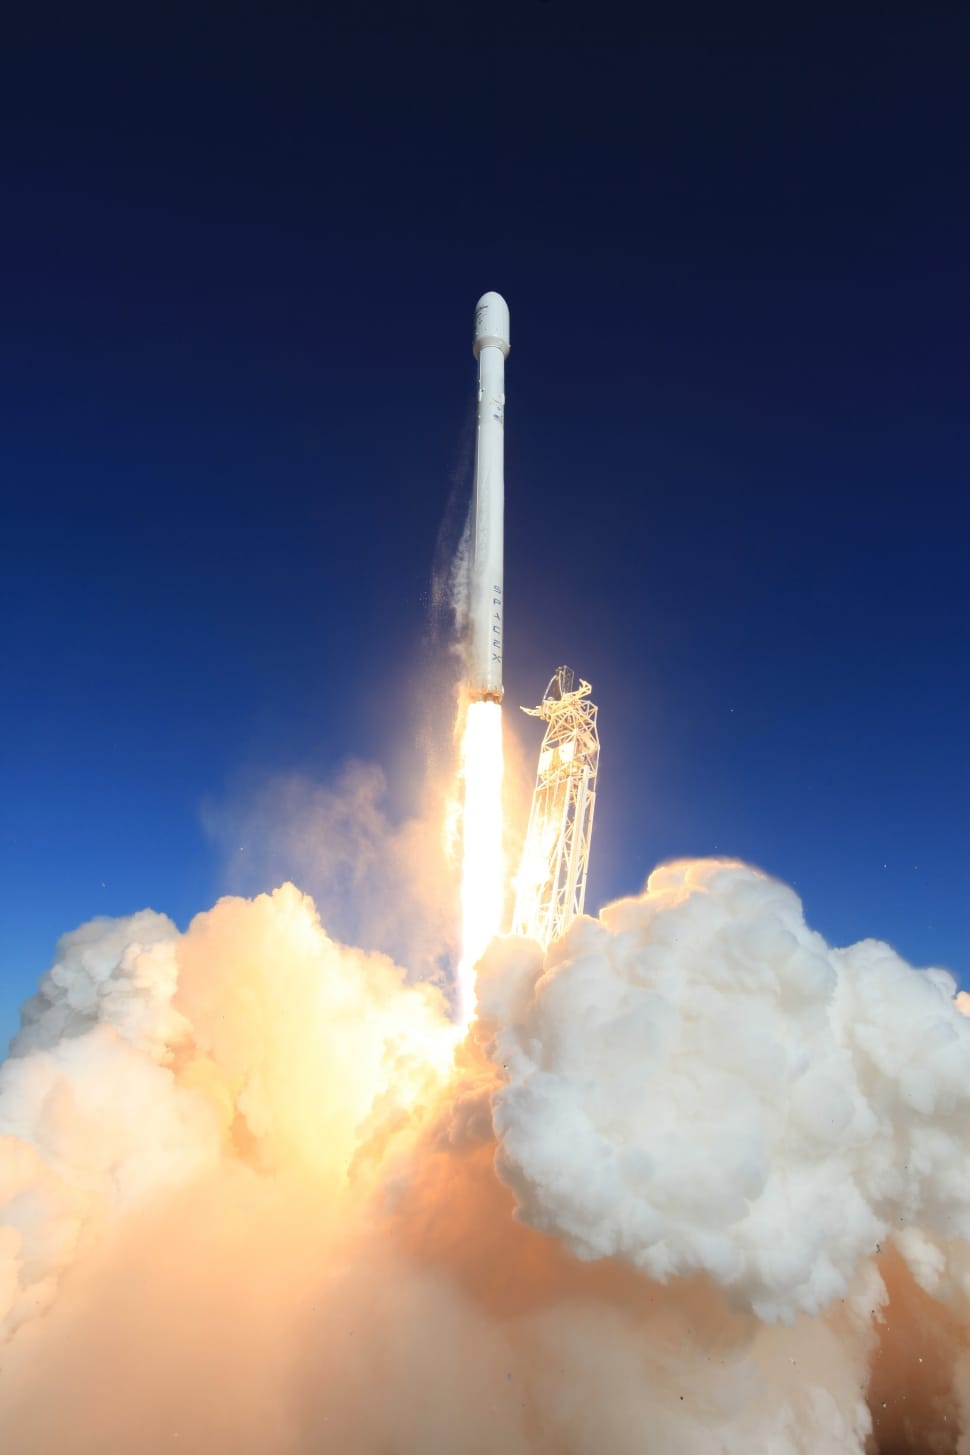 Lift-Off, Spacex, Rocket Launch, Launch, smoke - physical structure, no people preview